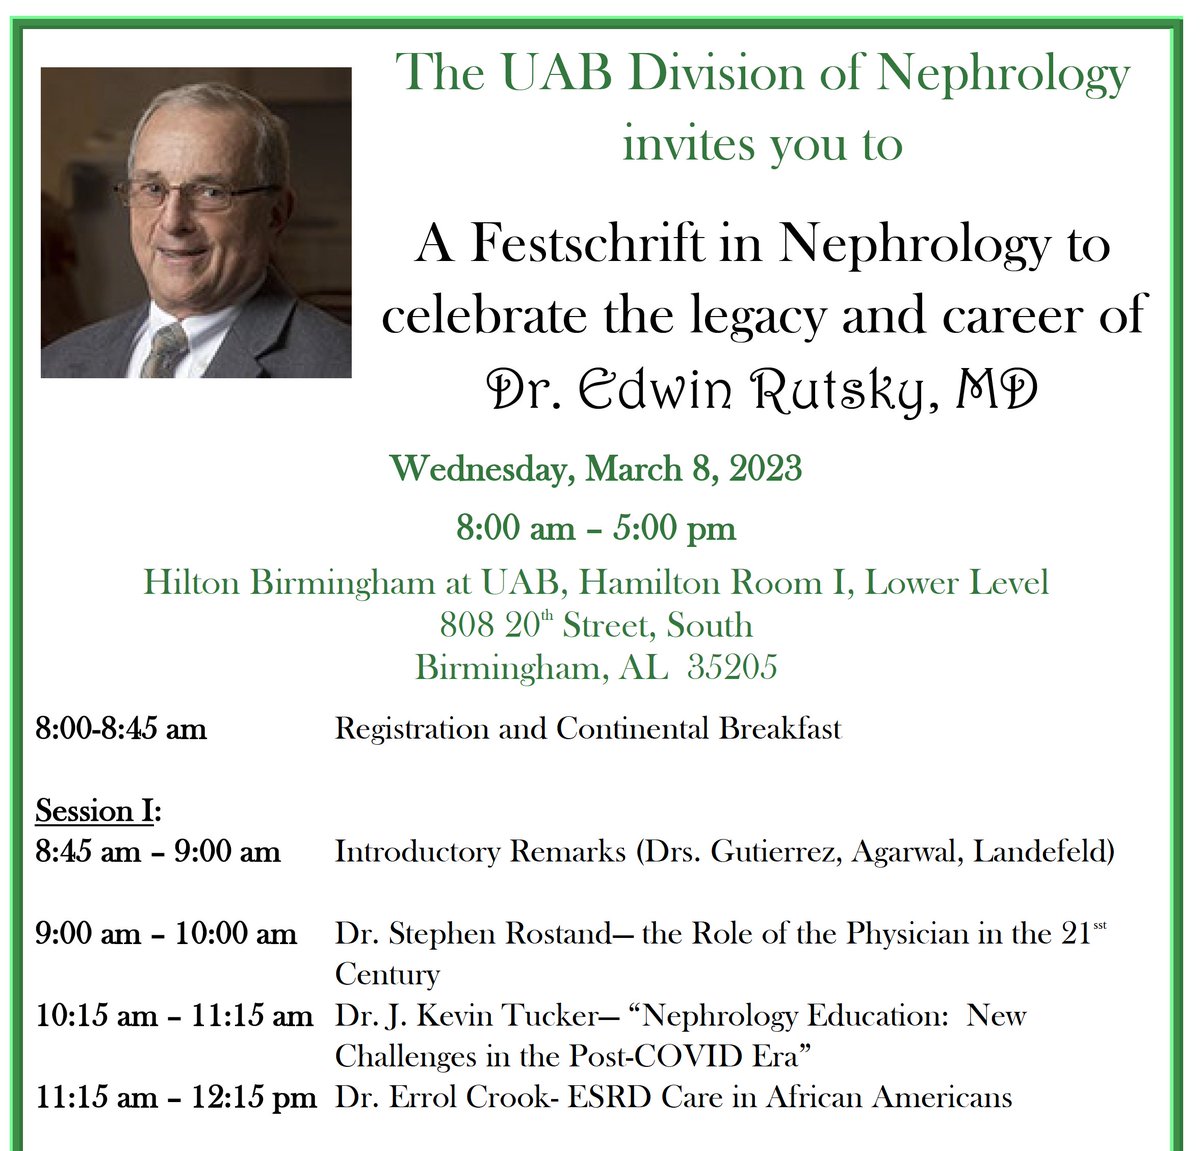 Honored to participate in the Festschrift for Dr. Ed Rutsky for his 50+ years of exceptional service to @UAB_NRTC @UABHeersink @UABDeptMed. Thrilled to have distinguished alumni - Drs. Kevin Tucker, Errol Crook, Tom Ozbrin, David White, Rick Lyerly and others at the event.